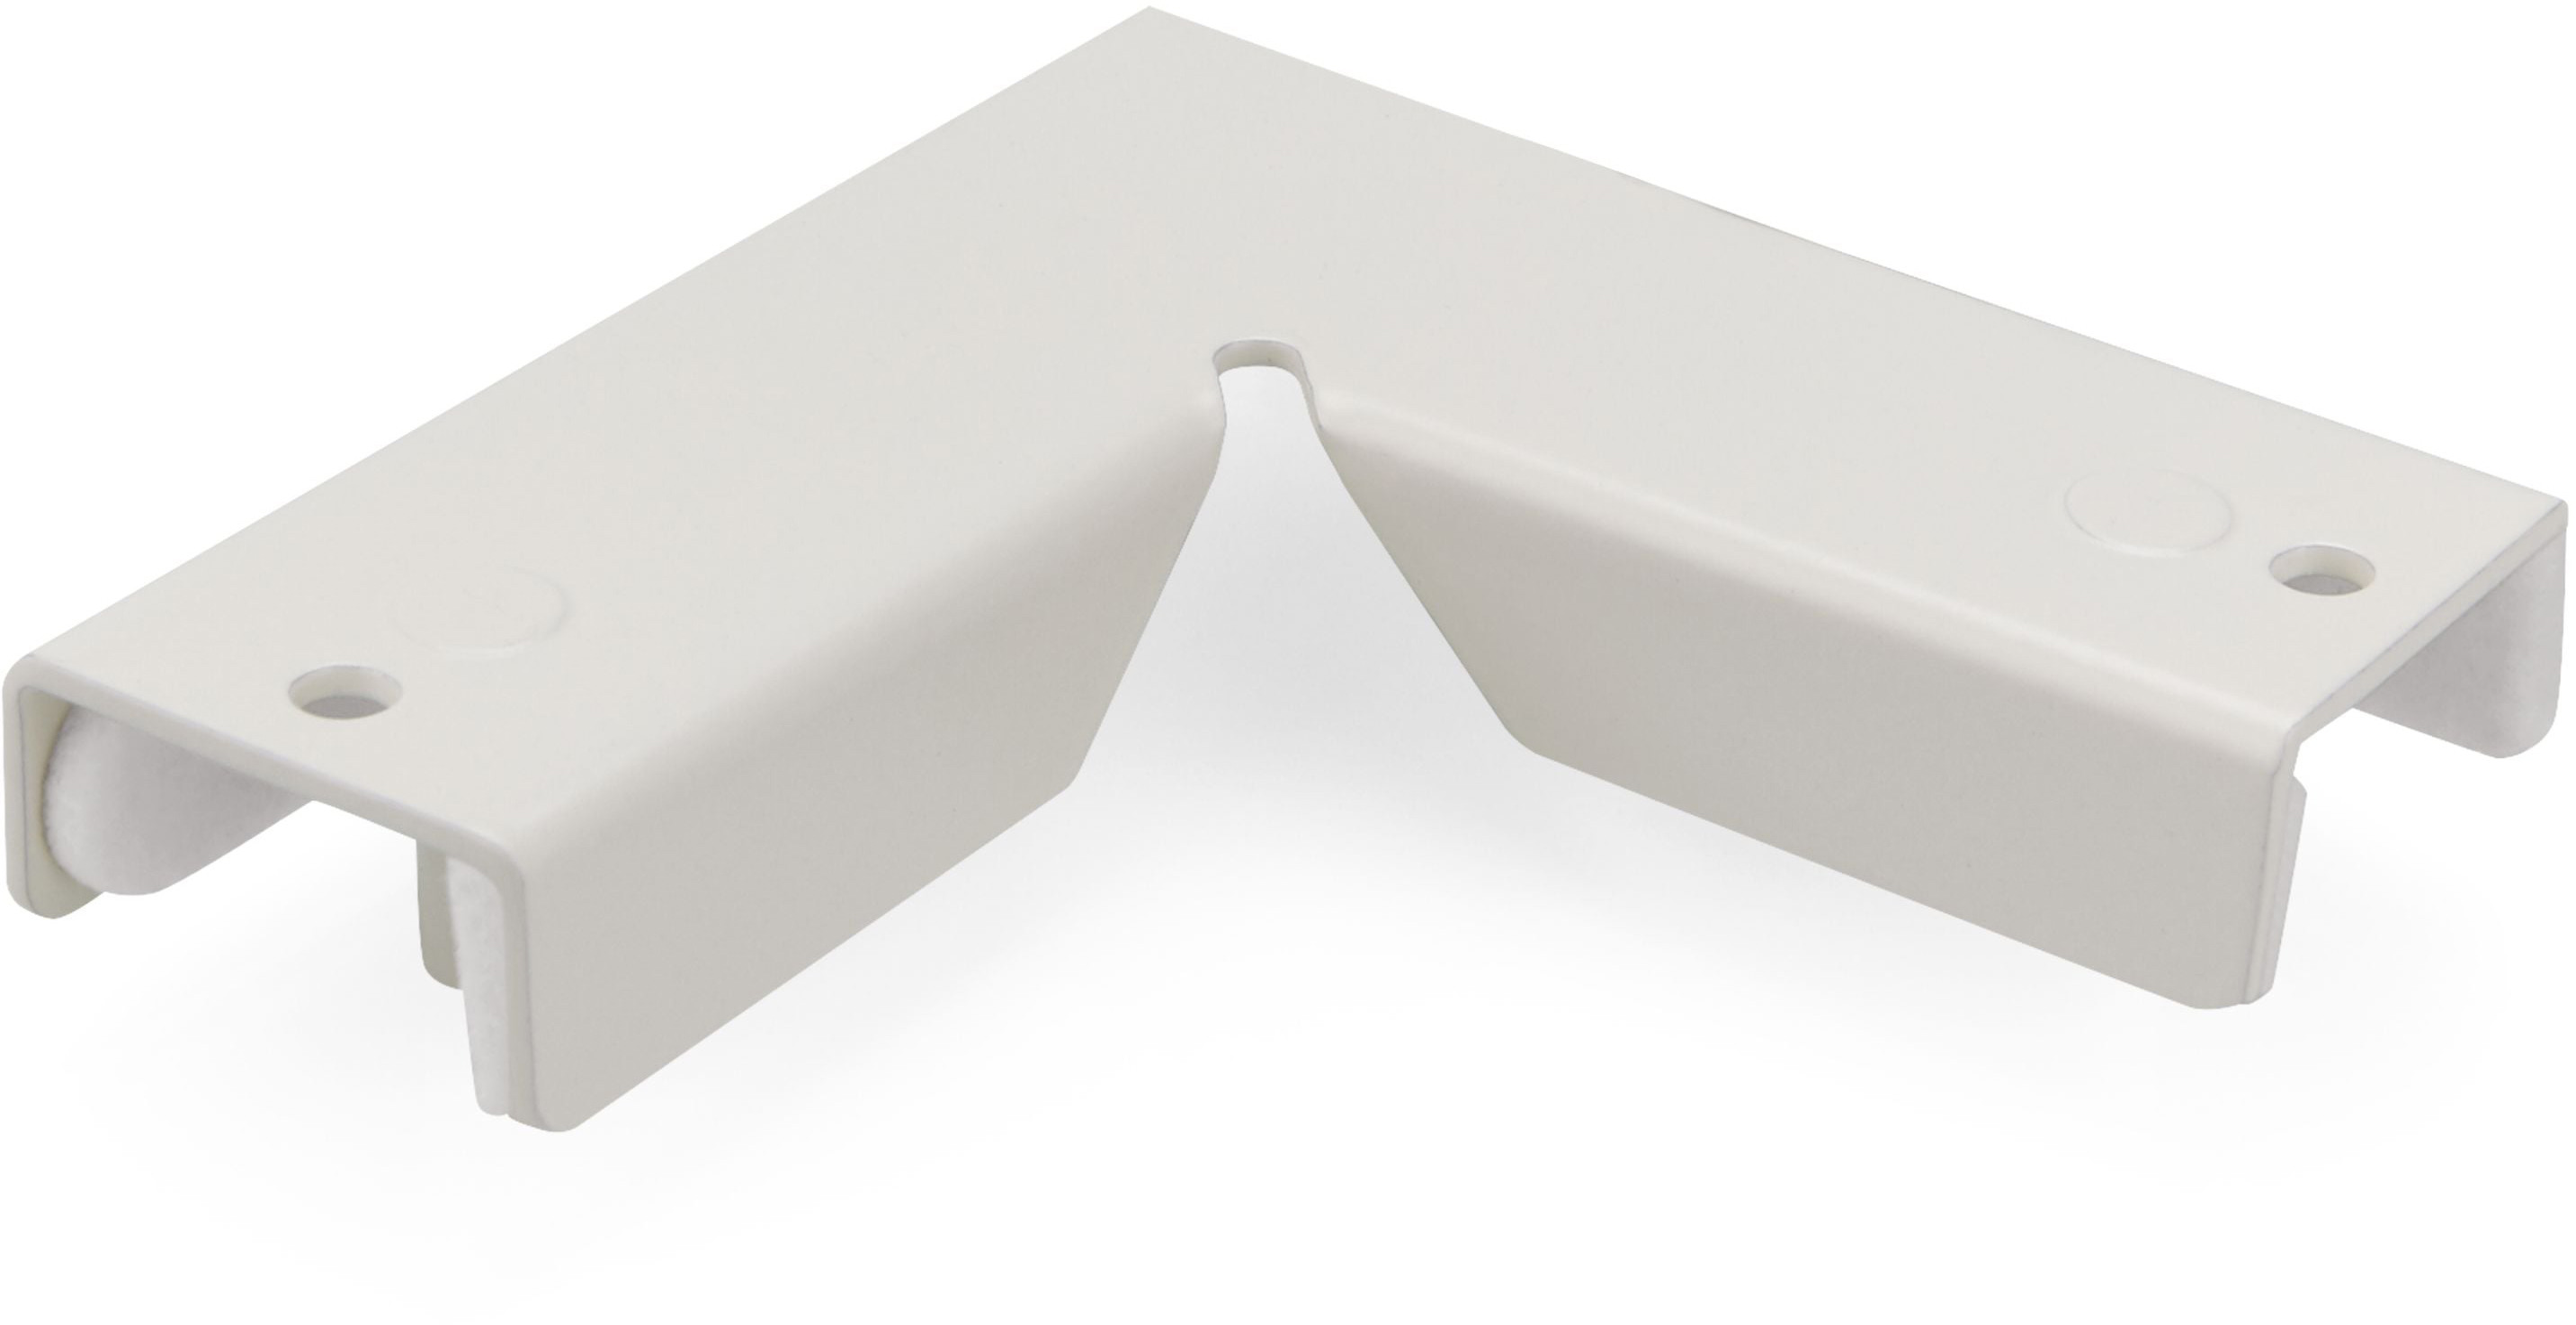 MAGNETOPLAN Top-Connector double corner 1146097 blanc, pour Infinity Wall